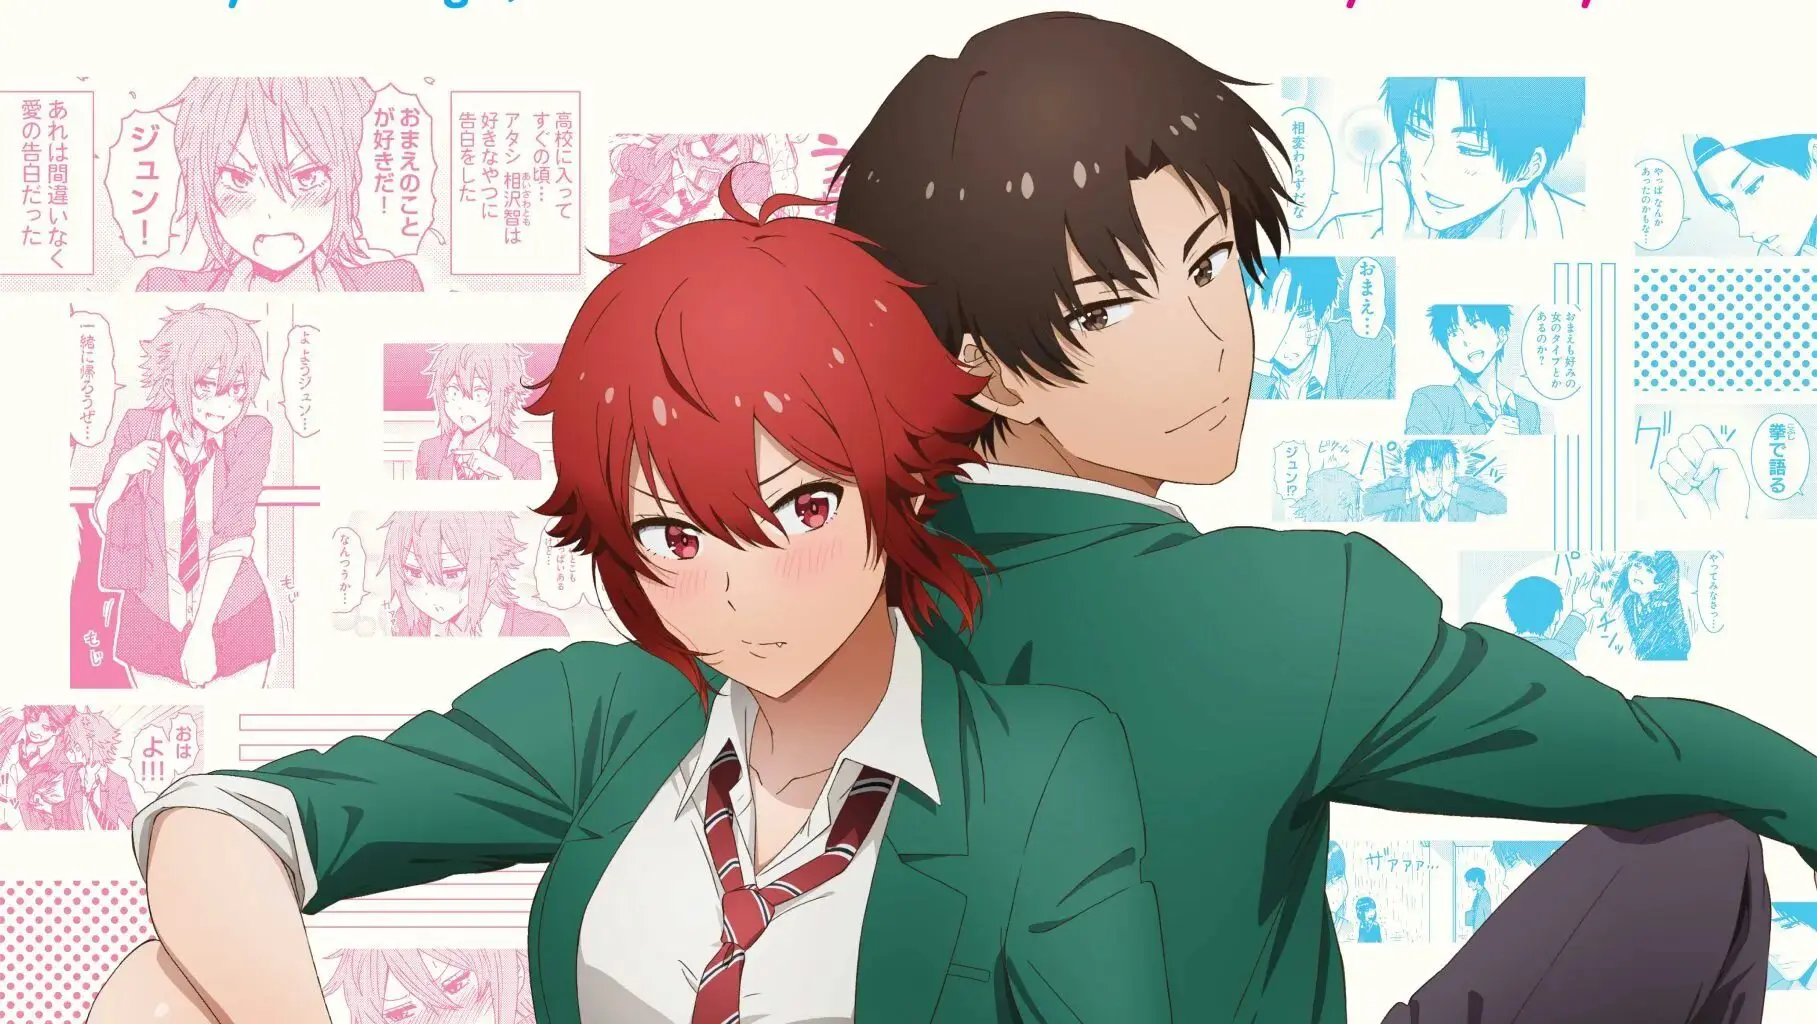 Tomo-chan is a Girl! episode 3 release date, where to watch, what to  expect, and more